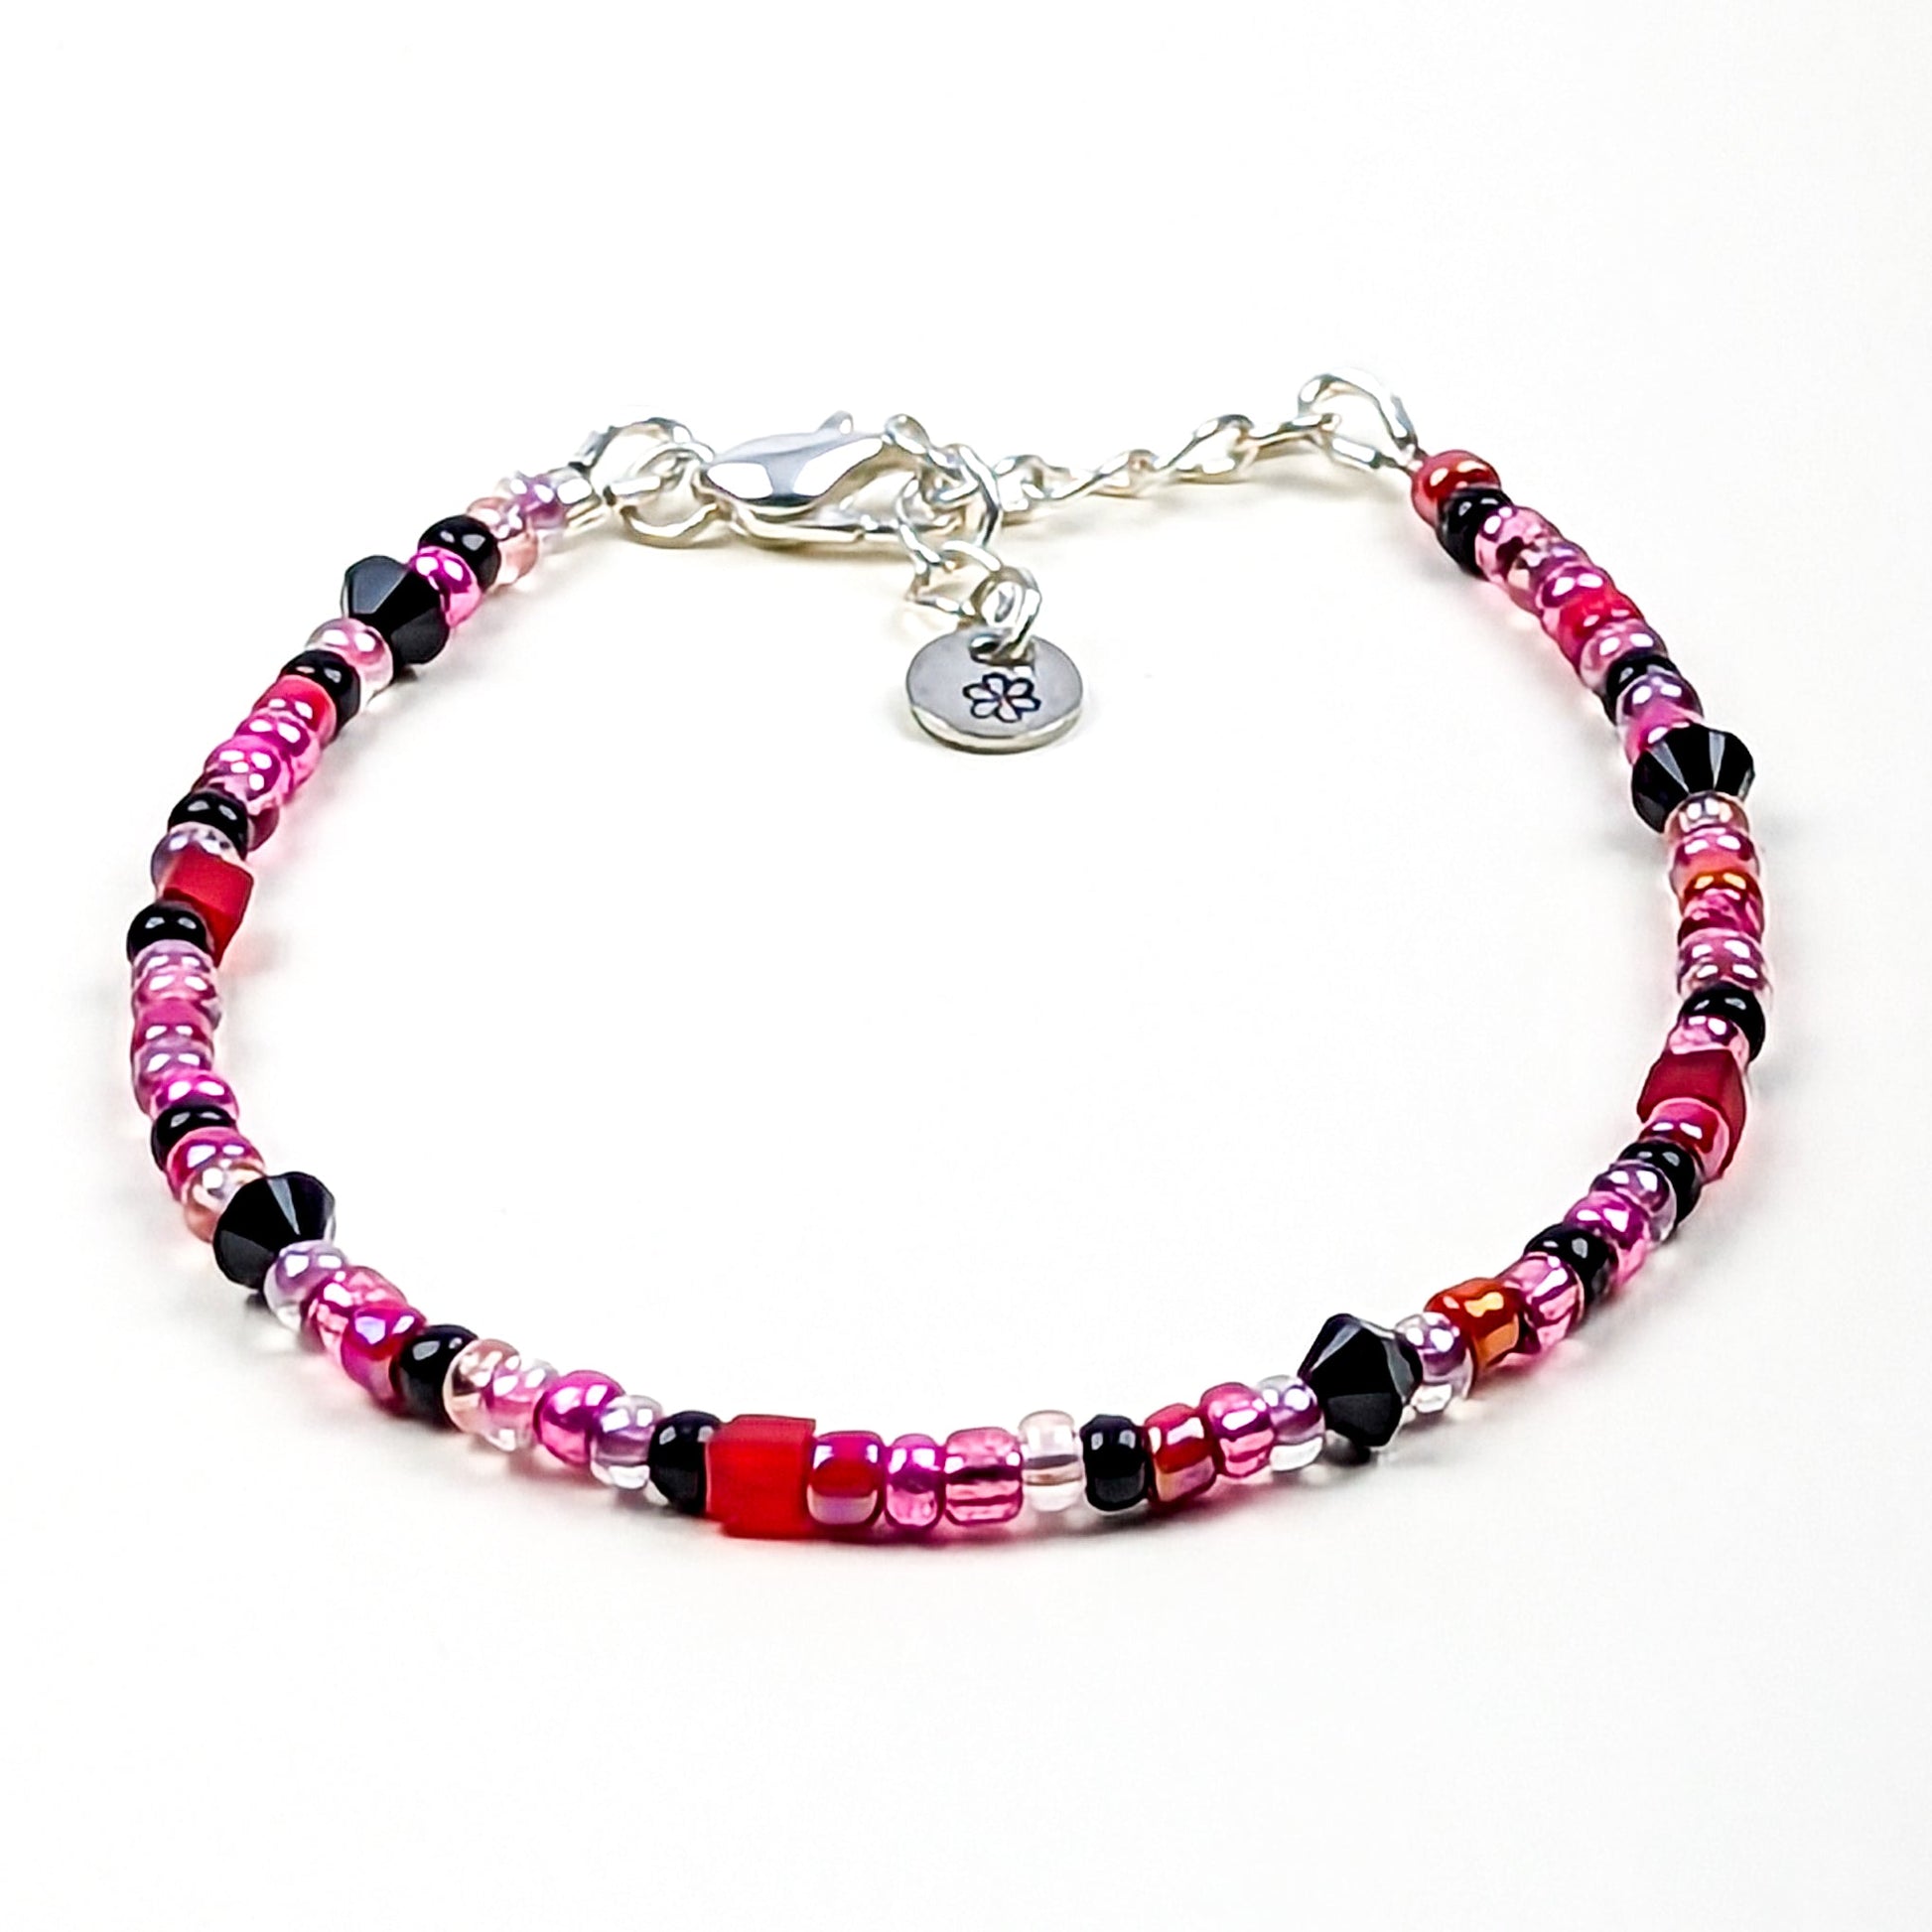 Assorted shaped glass seed beads - Red, Pink and Black bracelet - creations by cherie